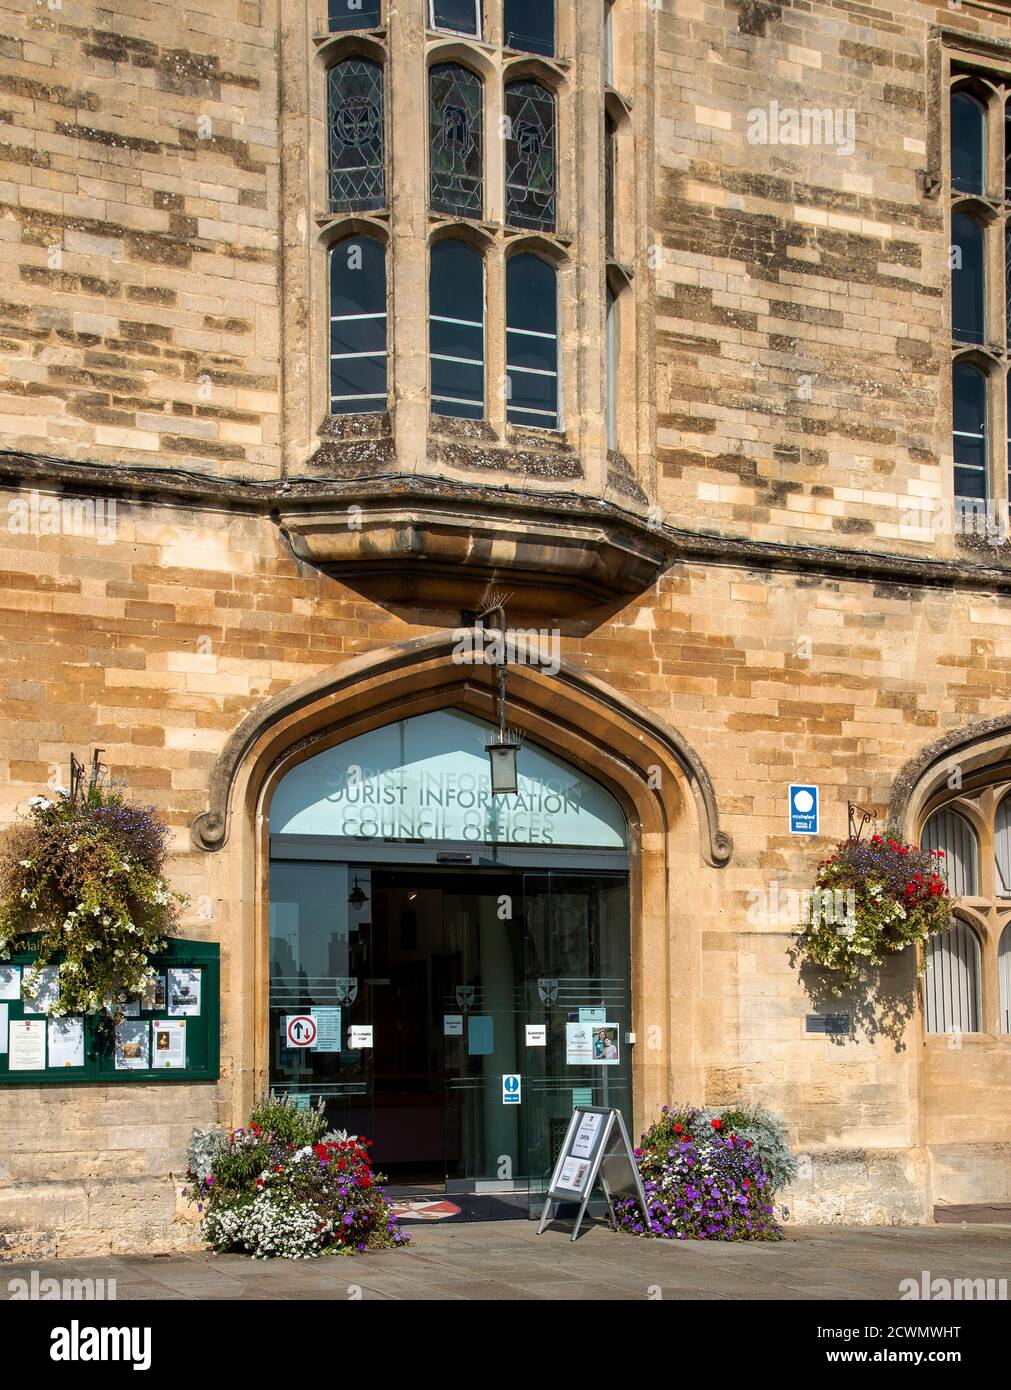 Malmesbury, Wiltshire, England, UK. 2020. The entrance to the Tourist Information office  on Cross Hayes in the market town of Malmesbury, UK Stock Photo